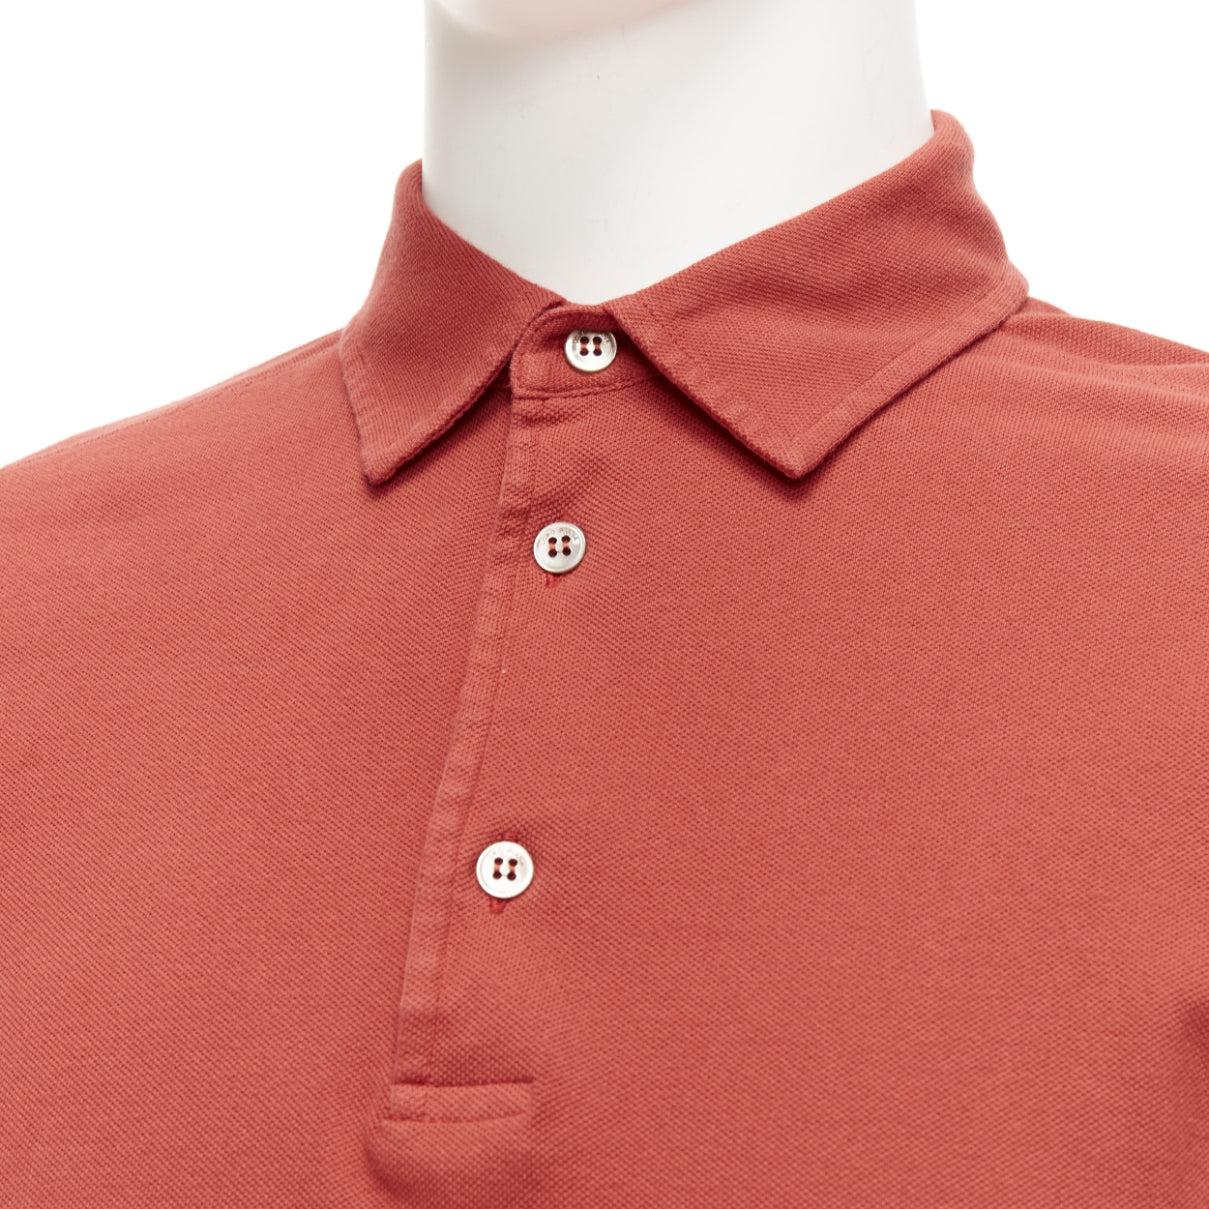 LORO PIANA 100% cotton brick red 3 buttons collared polo shirt S
Reference: YIKK/A00018
Brand: Loro Piana
Material: Cotton
Color: Red
Pattern: Solid
Closure: Button
Made in: Italy

CONDITION:
Condition: Very good, this item was pre-owned and is in